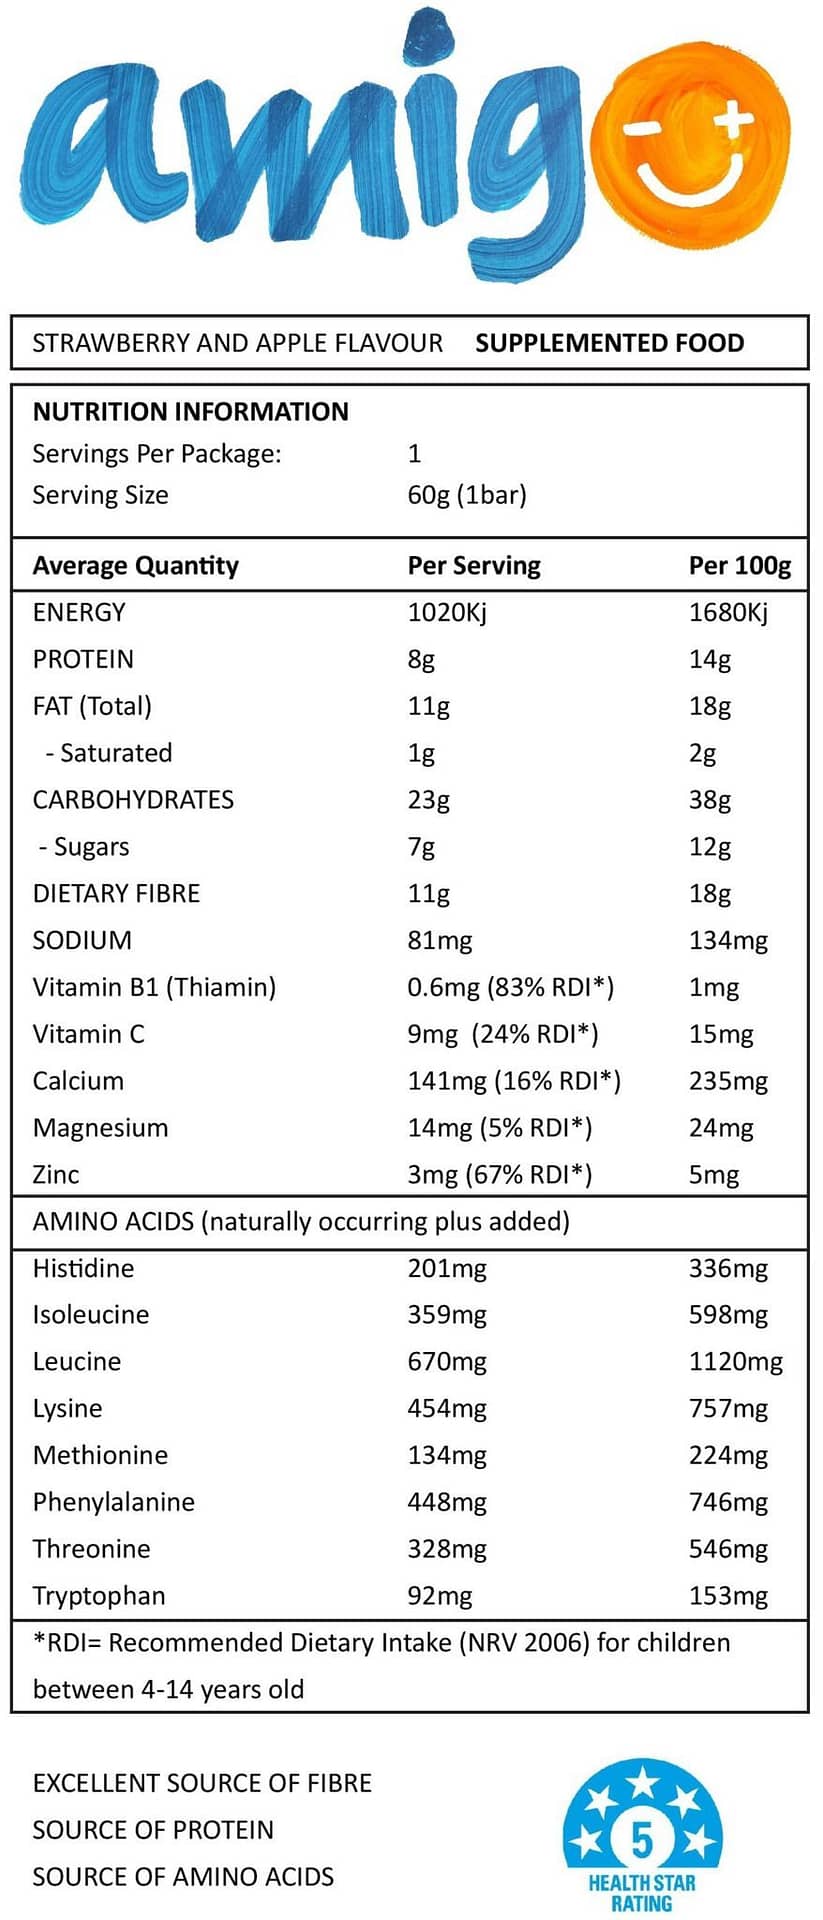 product-specifications-nutritional-information-panel-trimmed